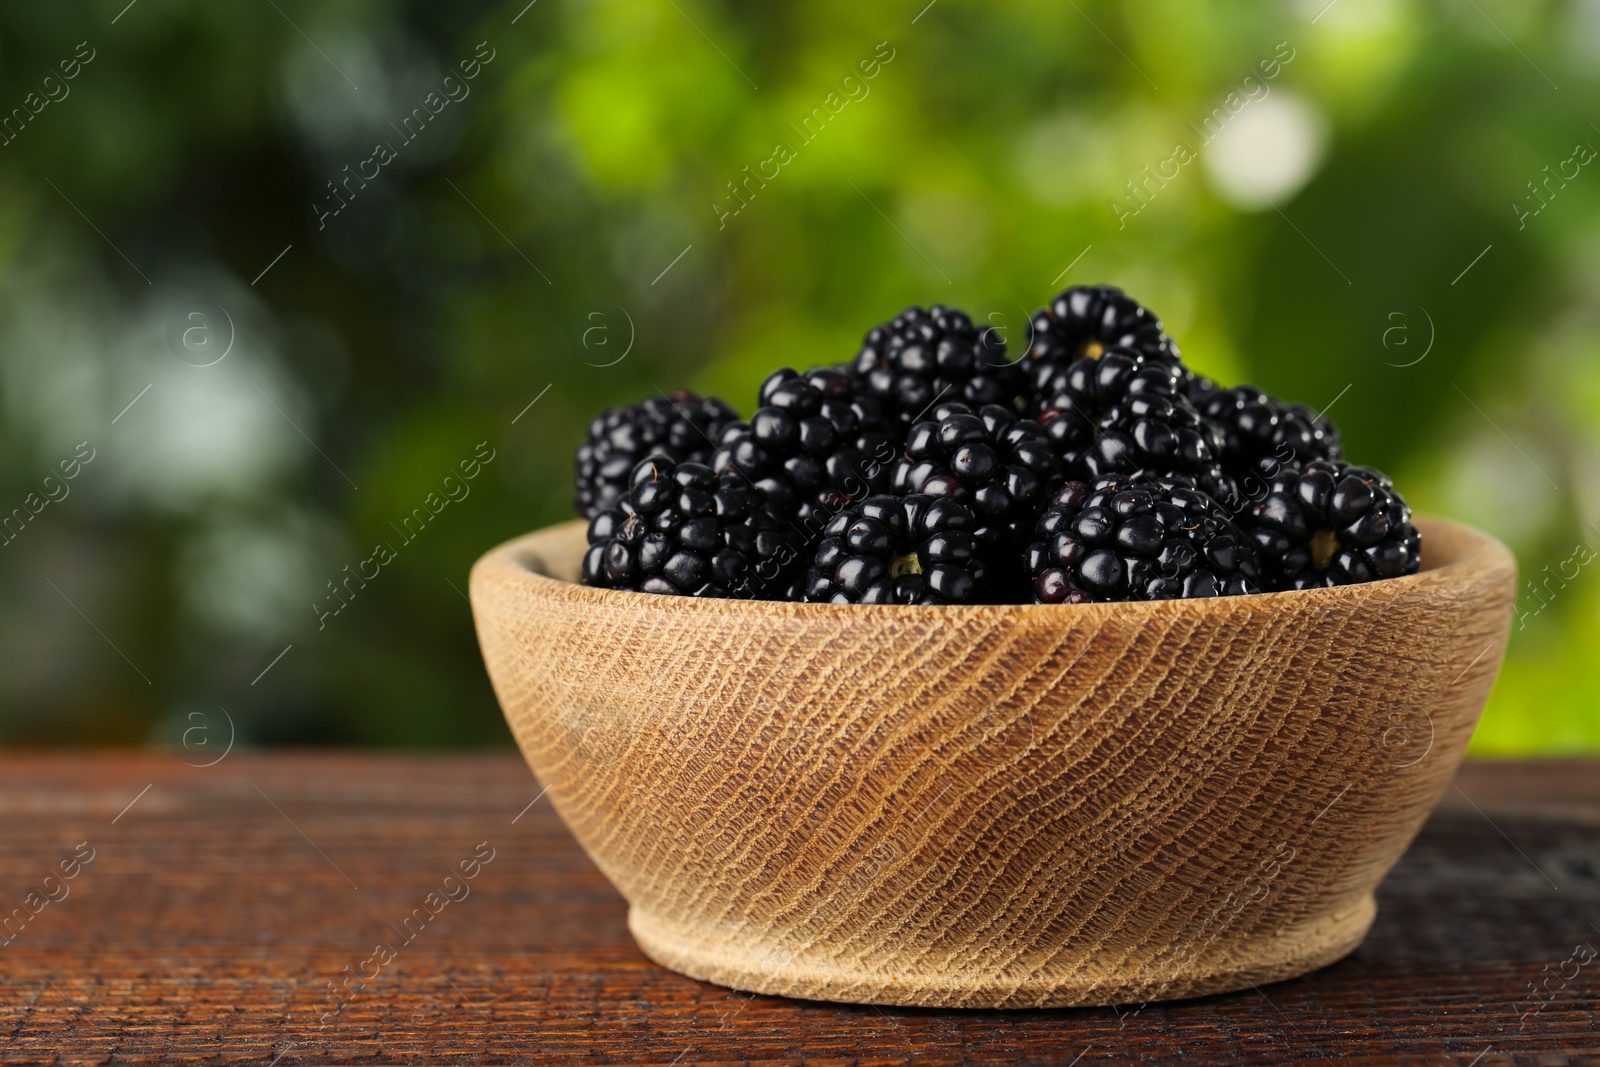 Photo of Bowl of fresh ripe blackberries on wooden table outdoors, closeup. Space for text